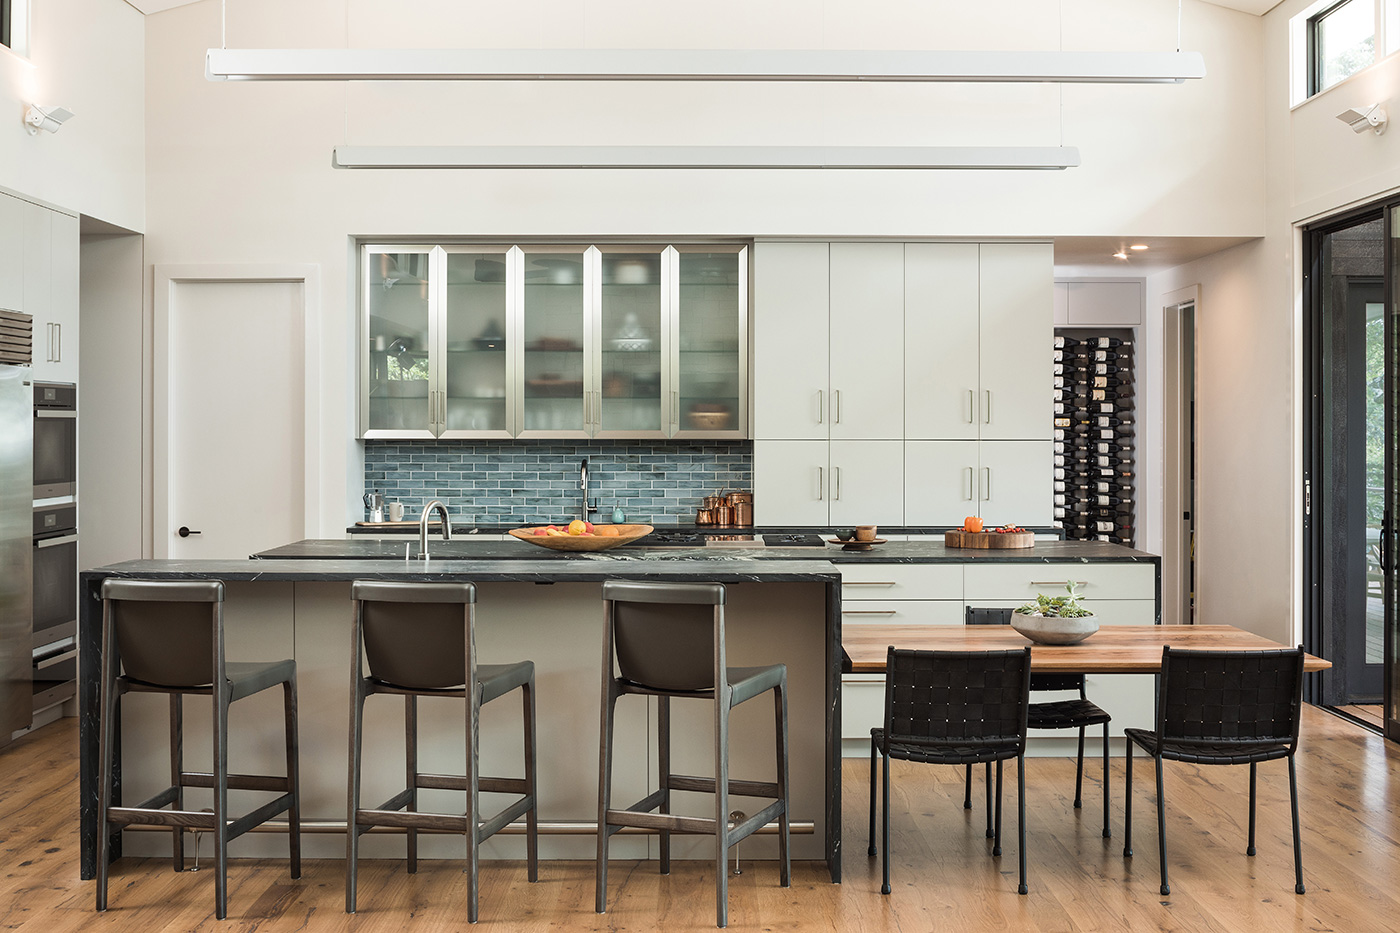 Modern kitchen with high ceilings and stools at counter.